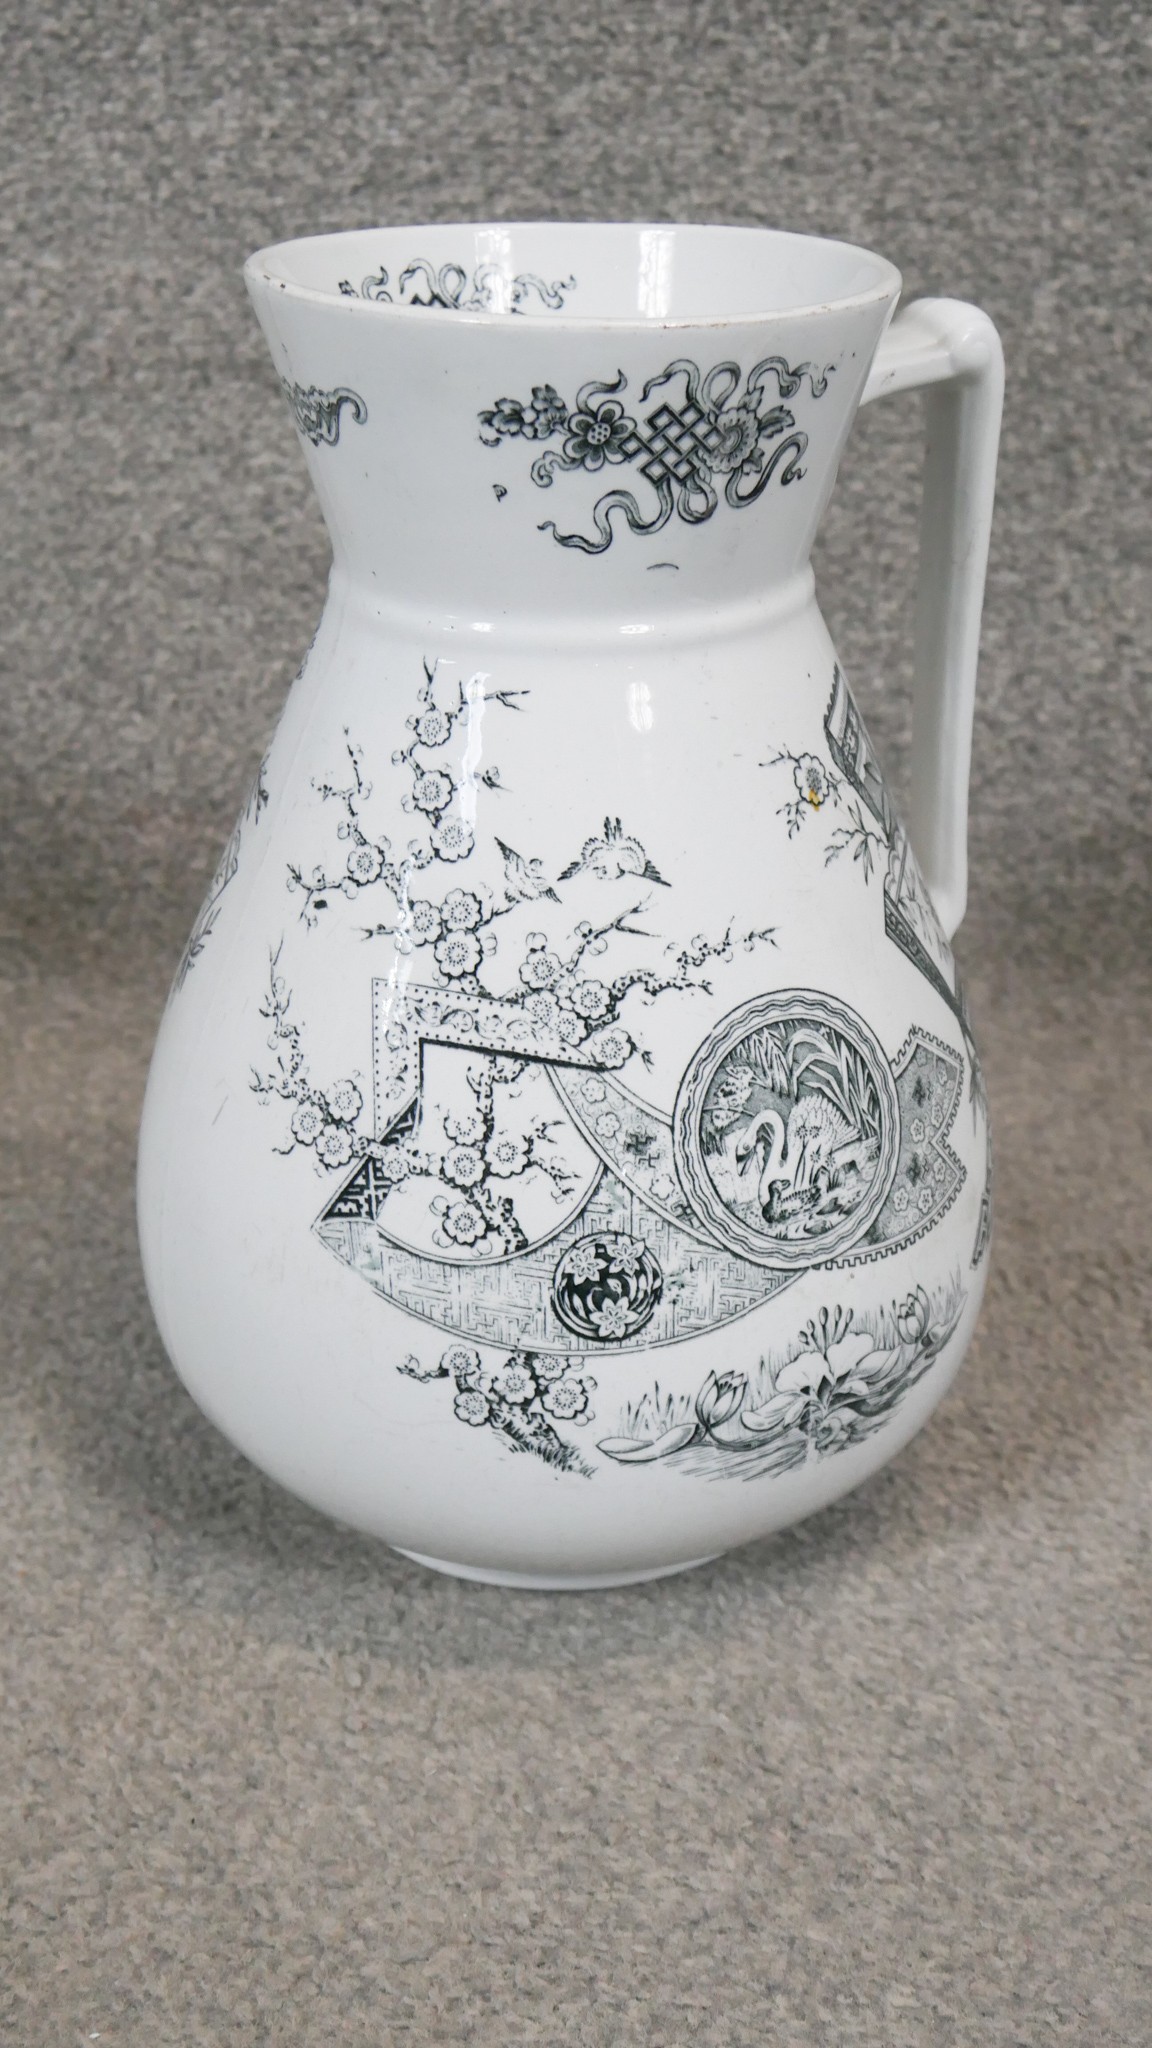 Two Victorian transfer design ceramic wash jugs. One with an Oriental fan design and one with roses. - Image 6 of 7